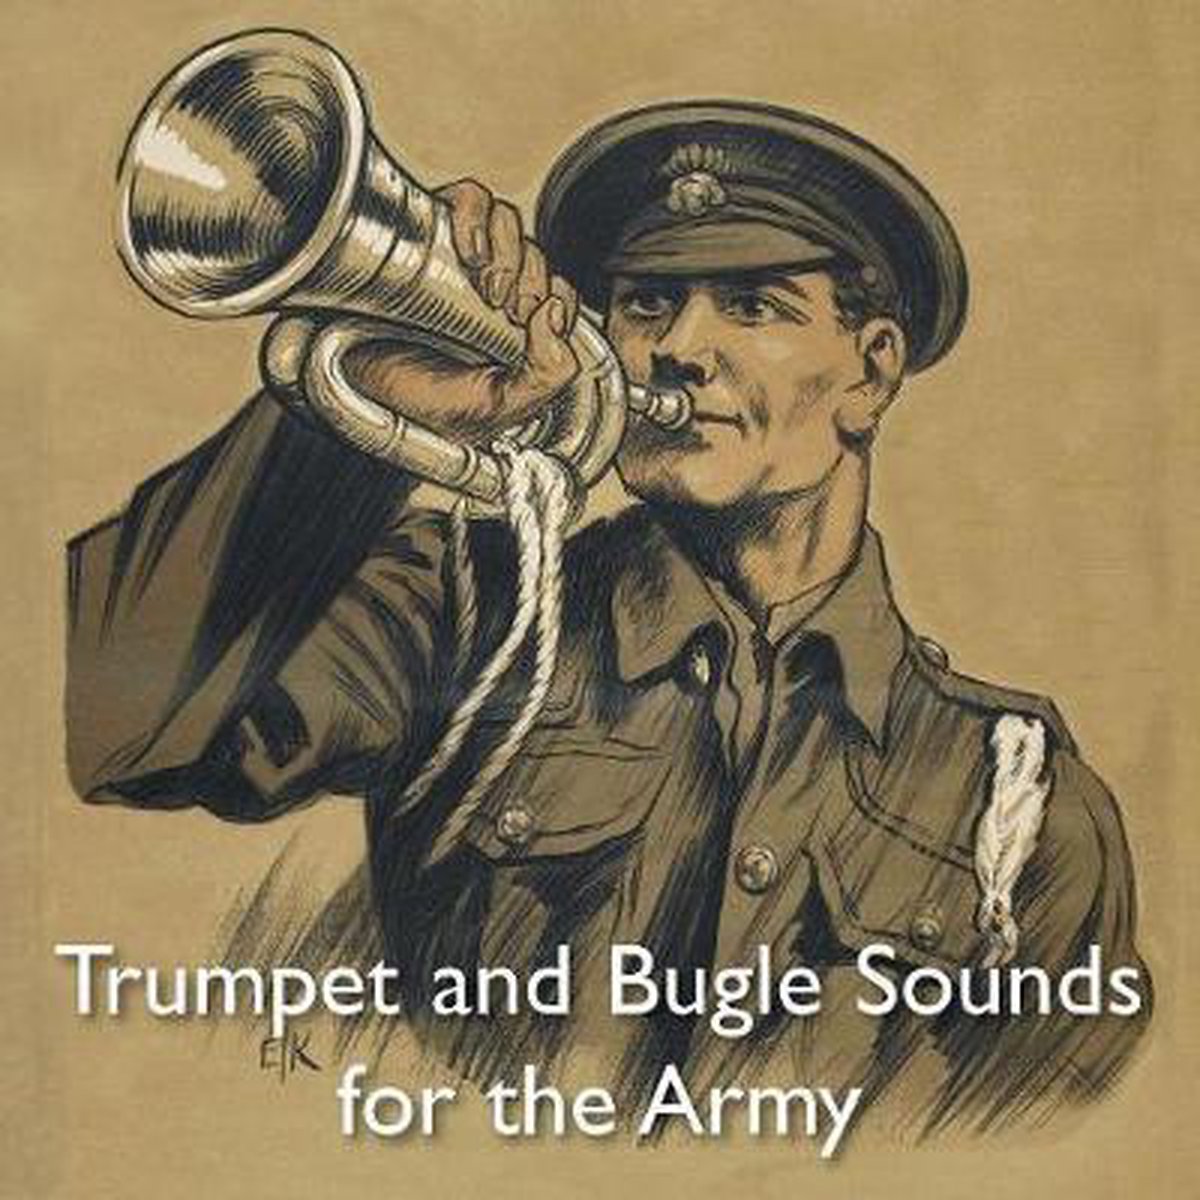 Trumpet and Bugle Sounds for the Army - Naval & Military Press